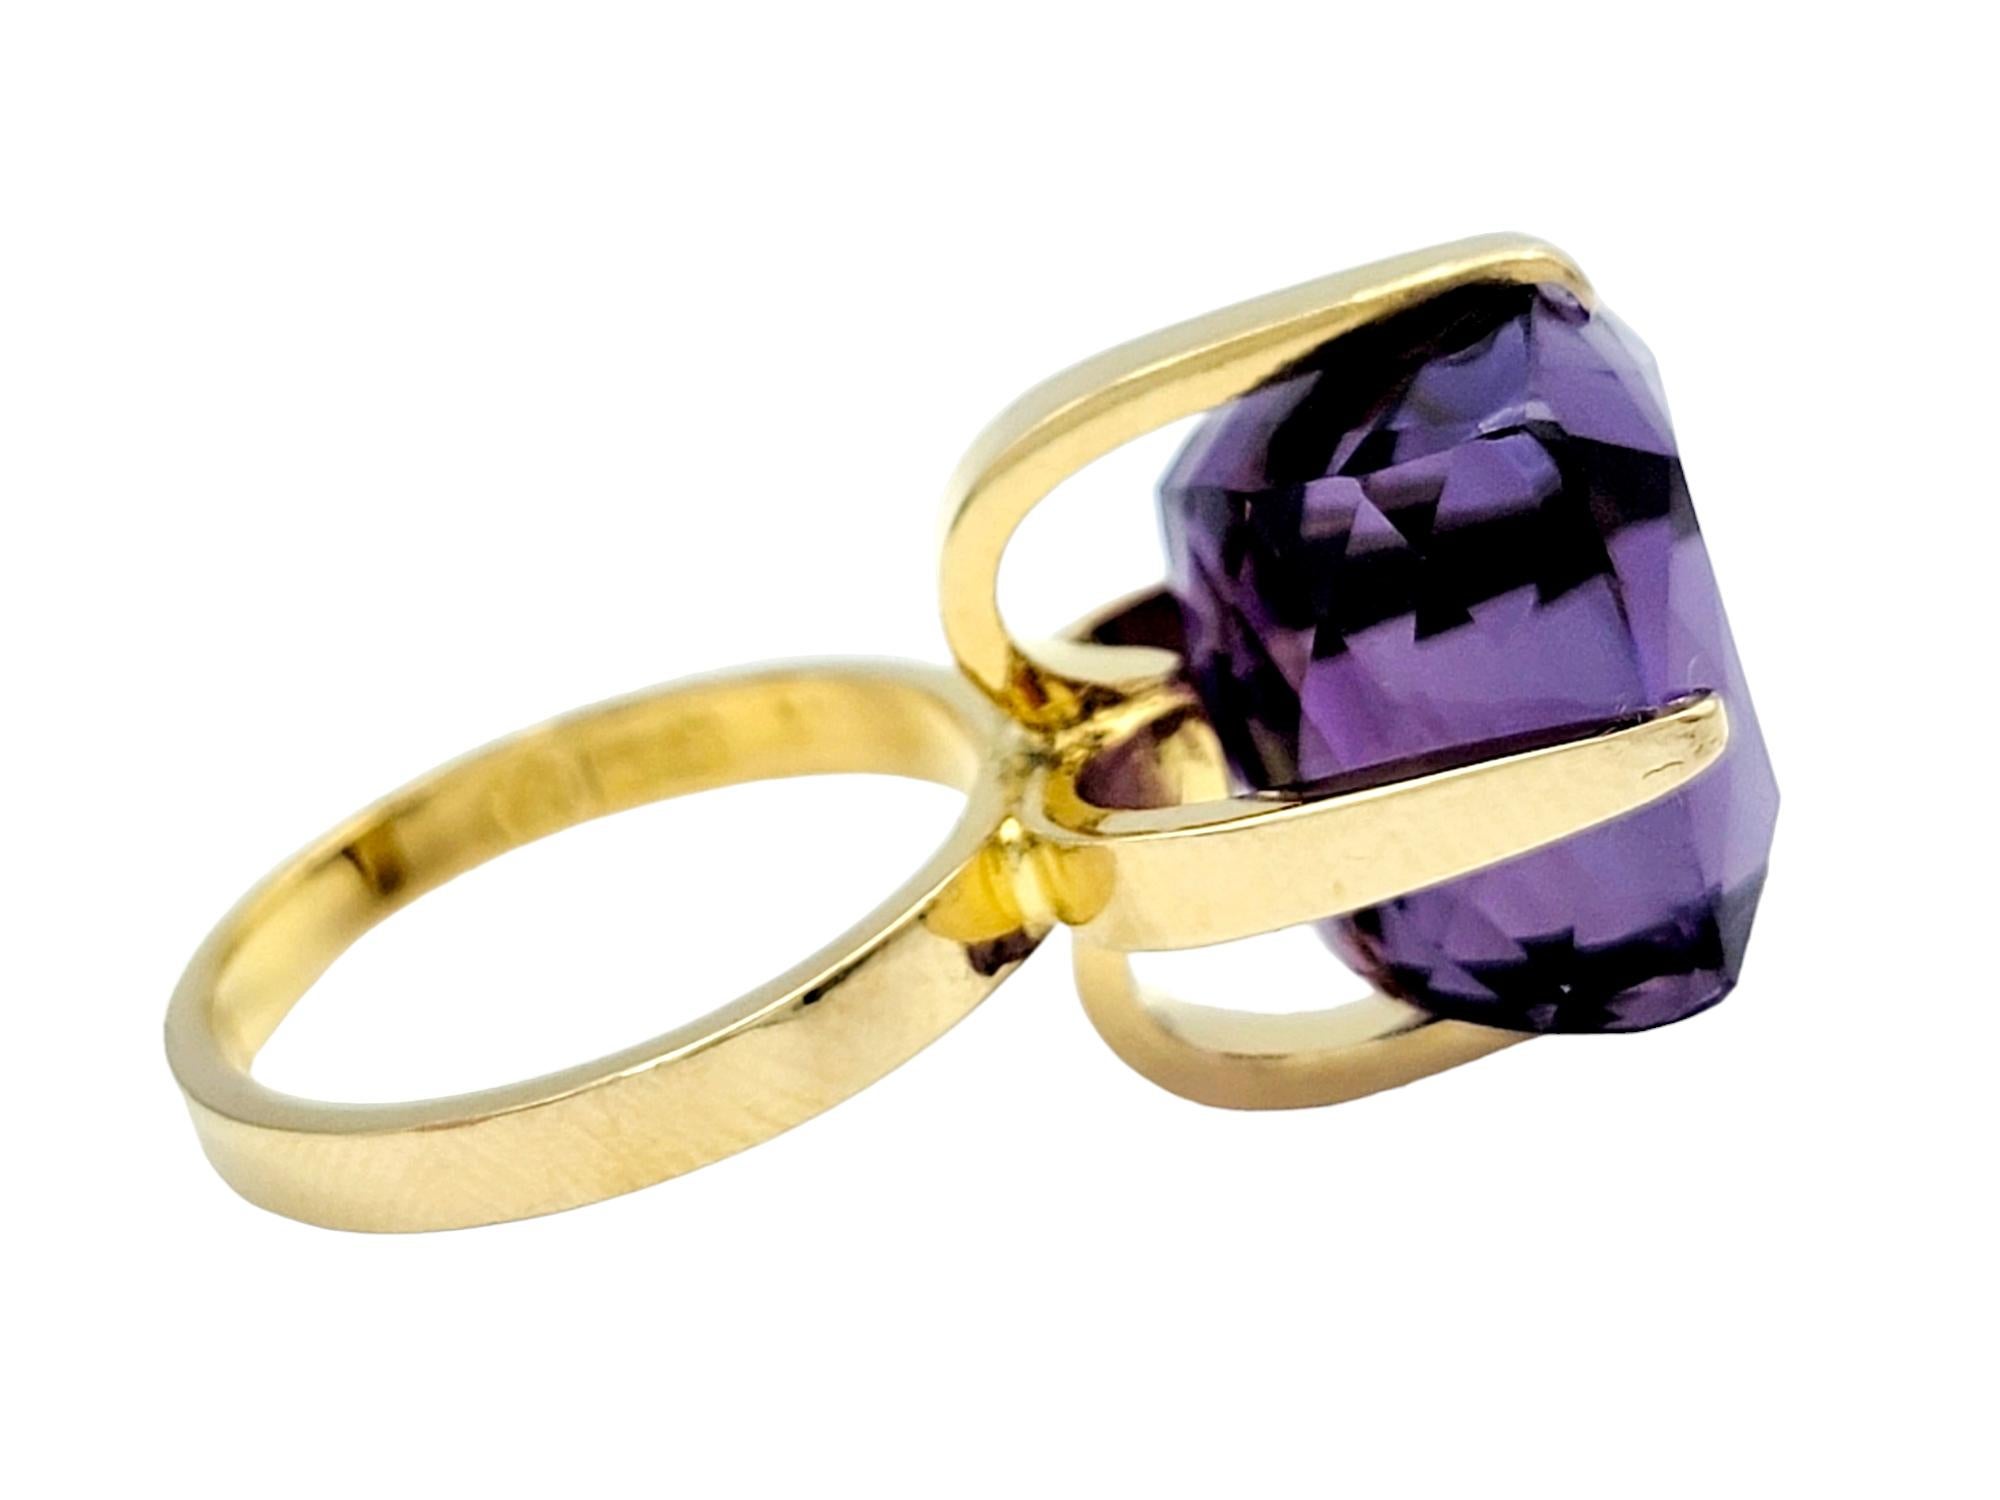 12.79 Carat Cushion Cut Amethyst High Profile Cocktail Ring 18 Karat Yellow Gold In Good Condition For Sale In Scottsdale, AZ